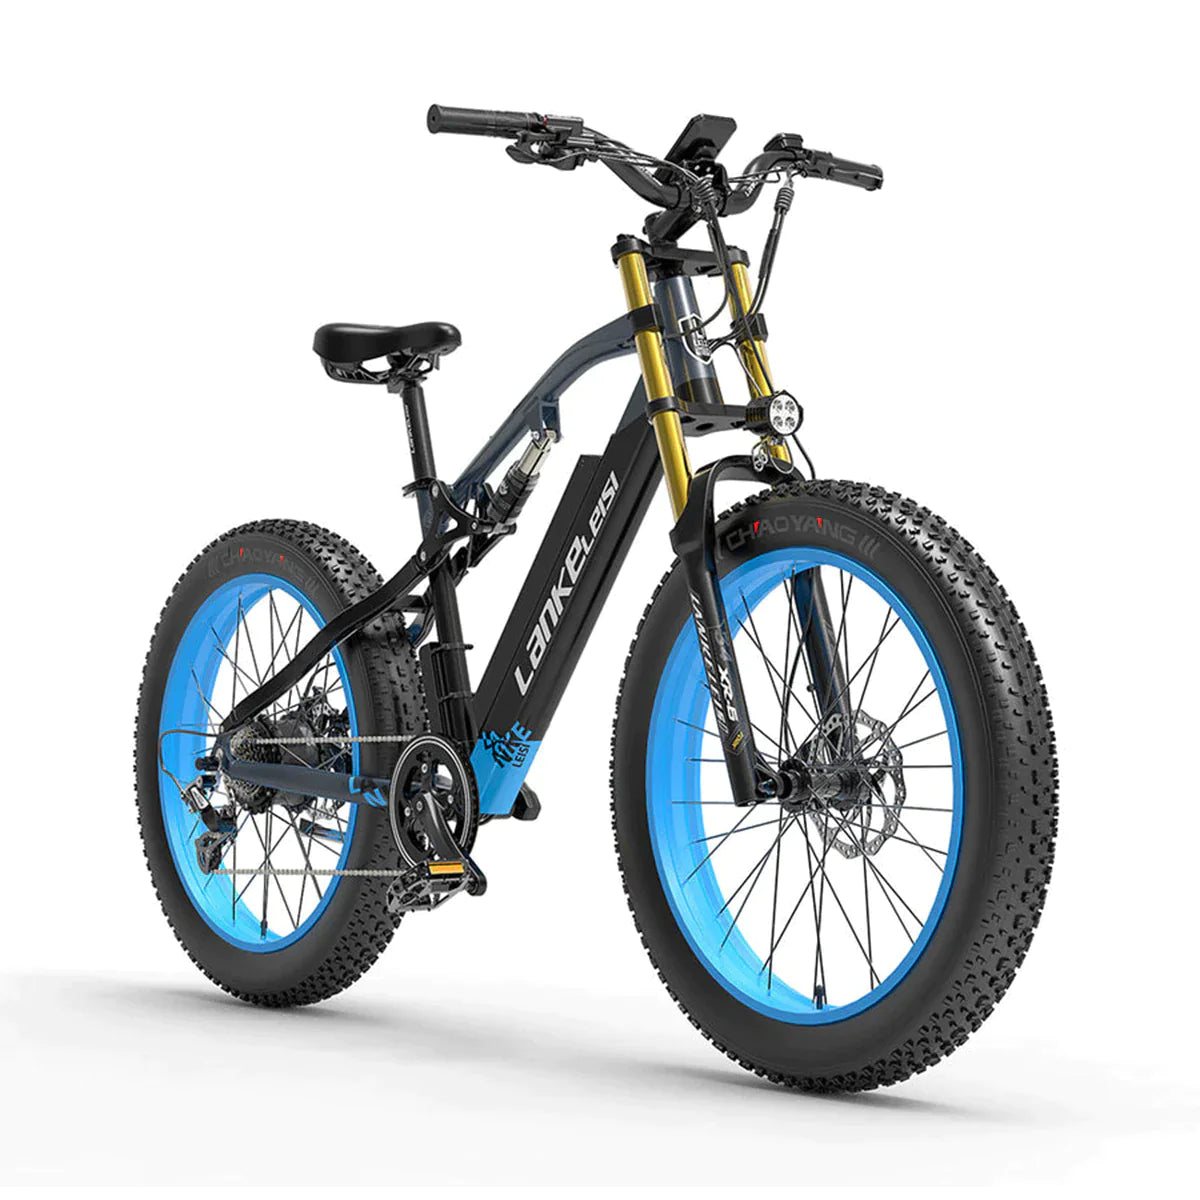 Lankeleisi RV700 Electric Mountain Bike - Pogo cycles UK -cycle to work scheme available